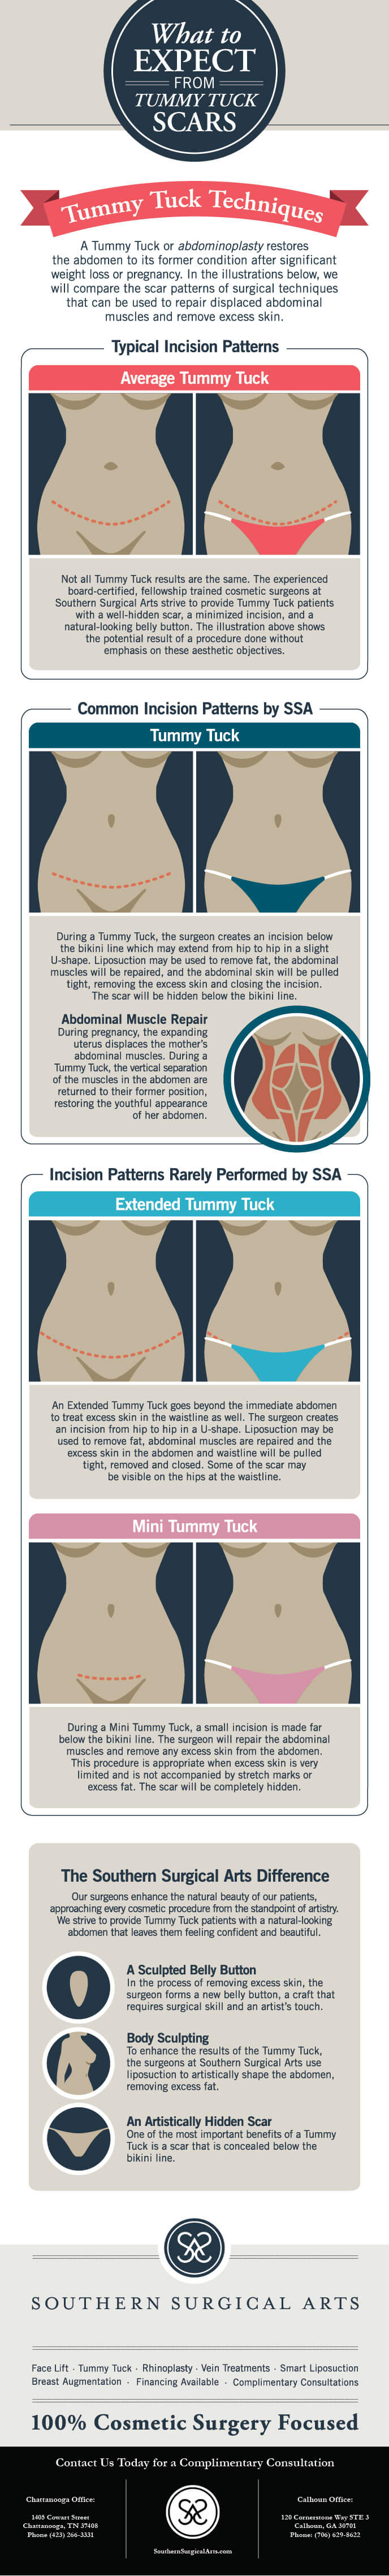 Belly Fat: What Can We Remove with a Tummy Tuck?